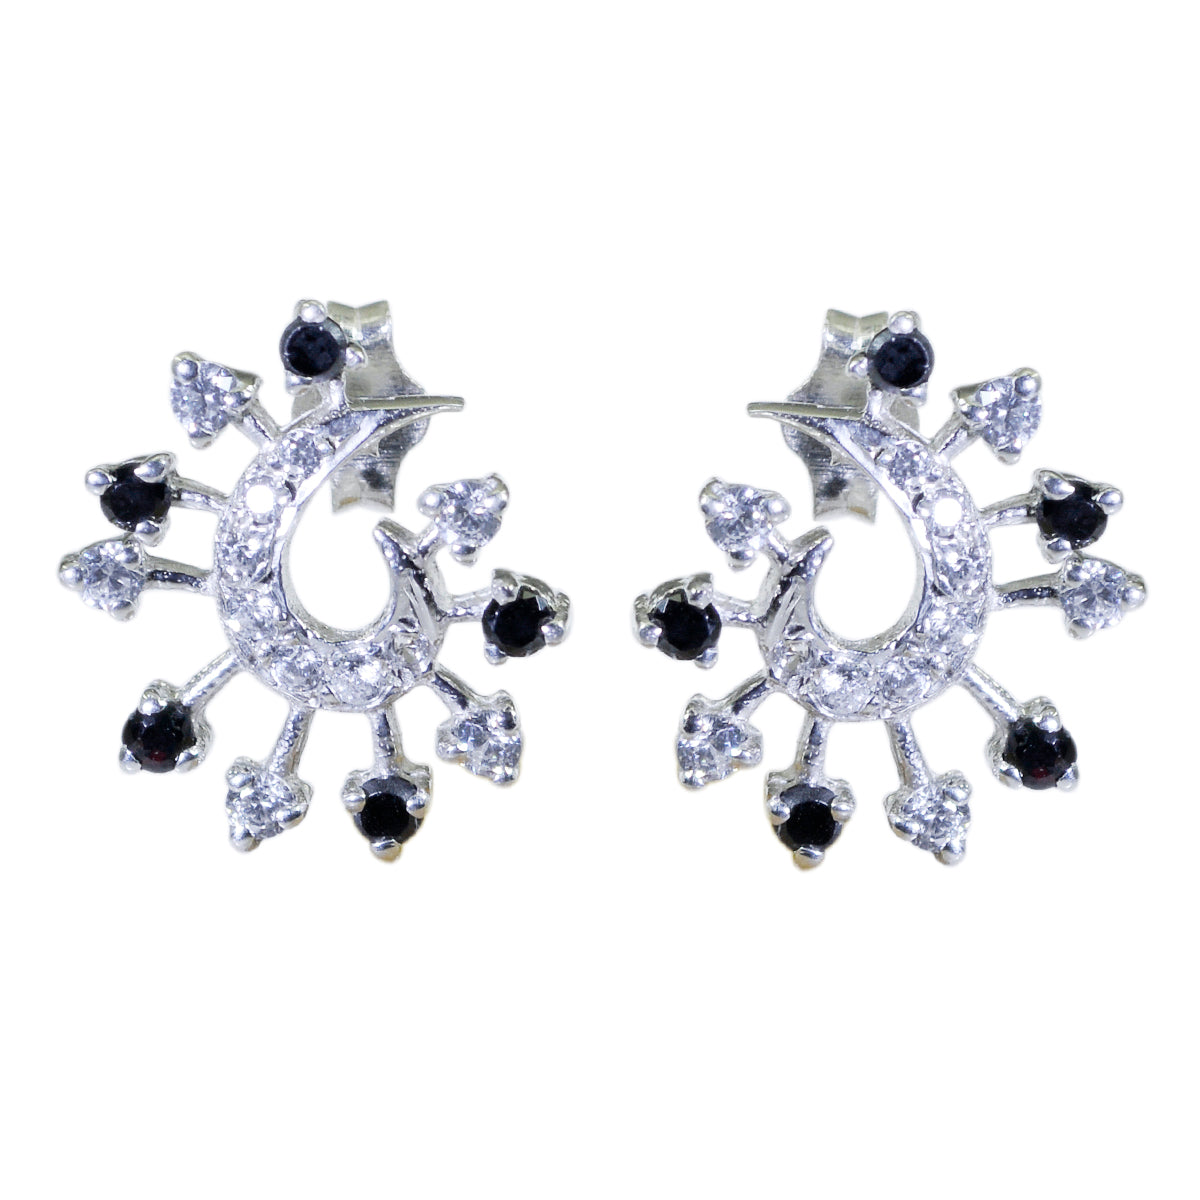 Riyo Genuine Gems round Faceted Multi Multi CZ Silver Earrings gift for independence